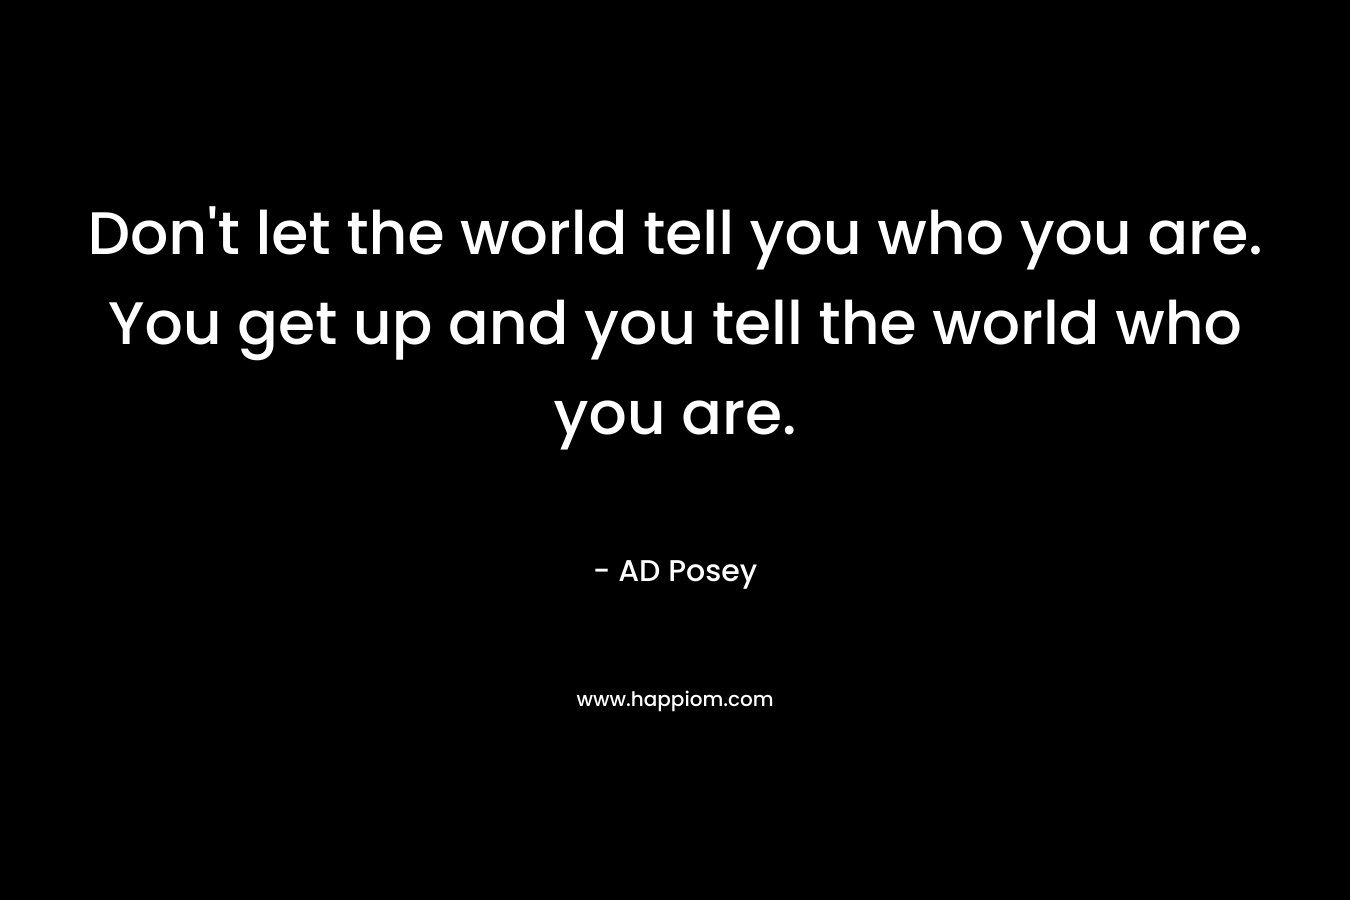 Don't let the world tell you who you are. You get up and you tell the world who you are.